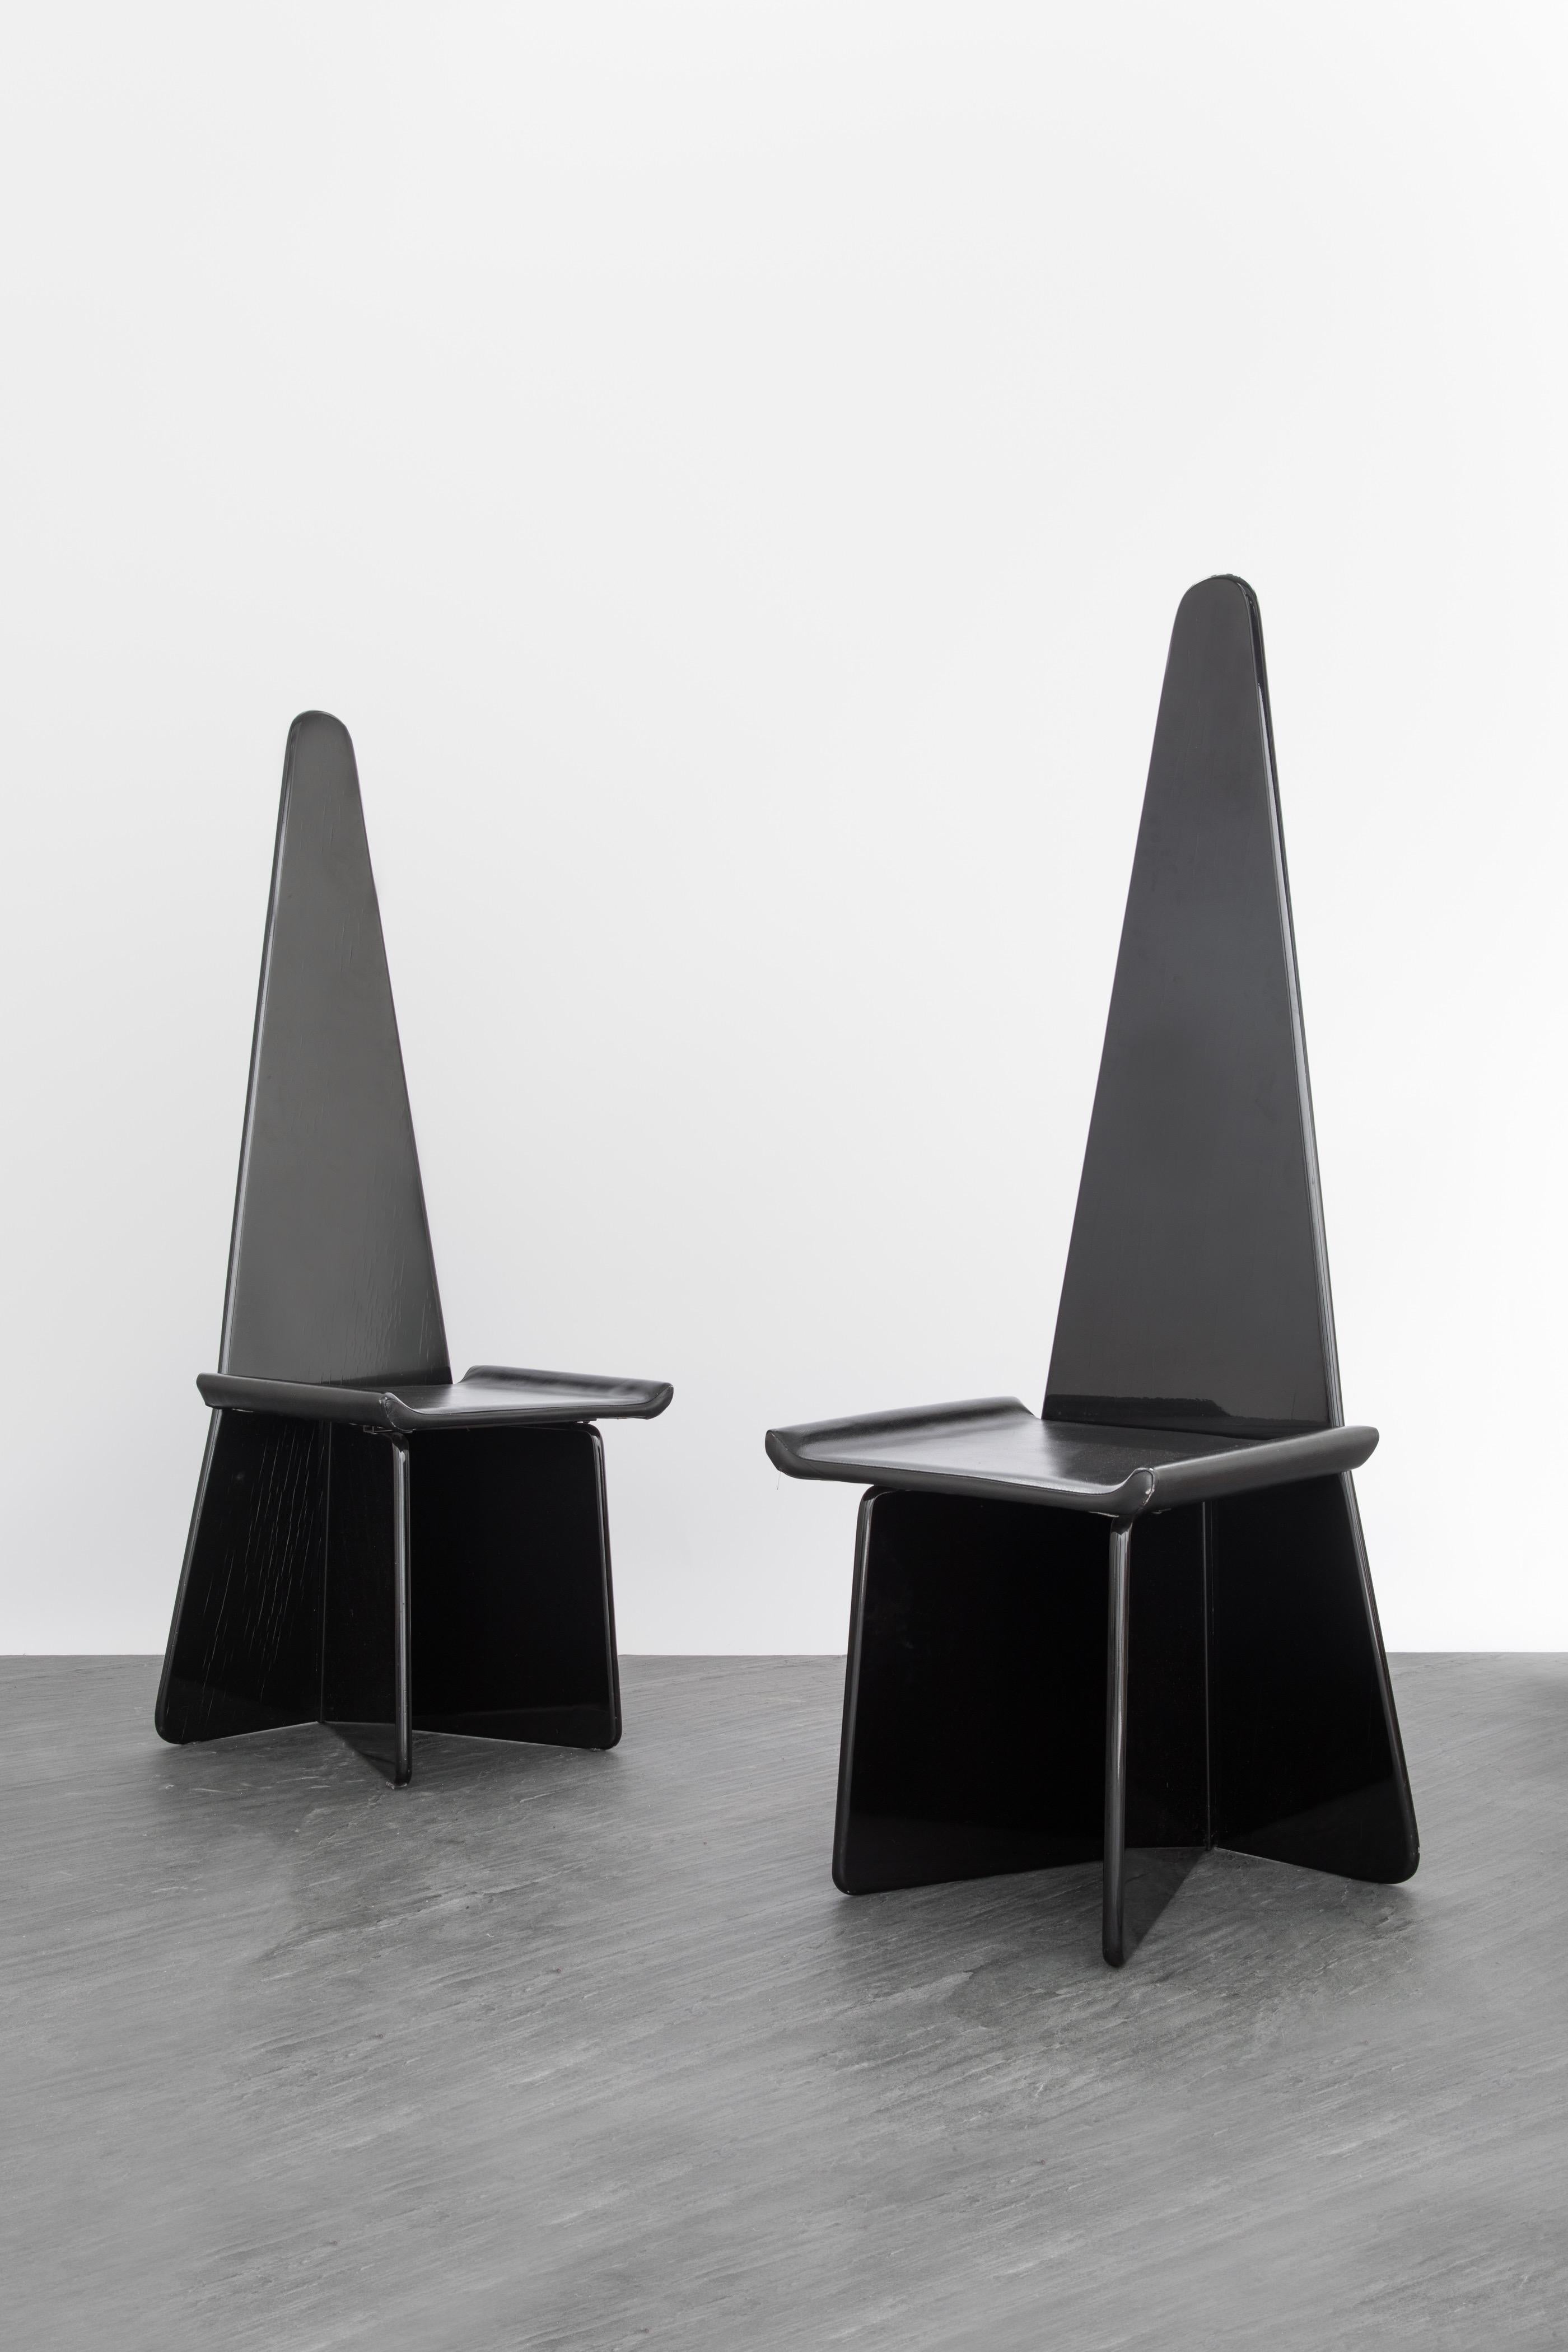 Antonio Ronchetti for Sormani
Set of 6 sculptural chairs, circa 1970
Black lacquered wood, black leather
Measures : H. 135 x 46 x 42 cm.